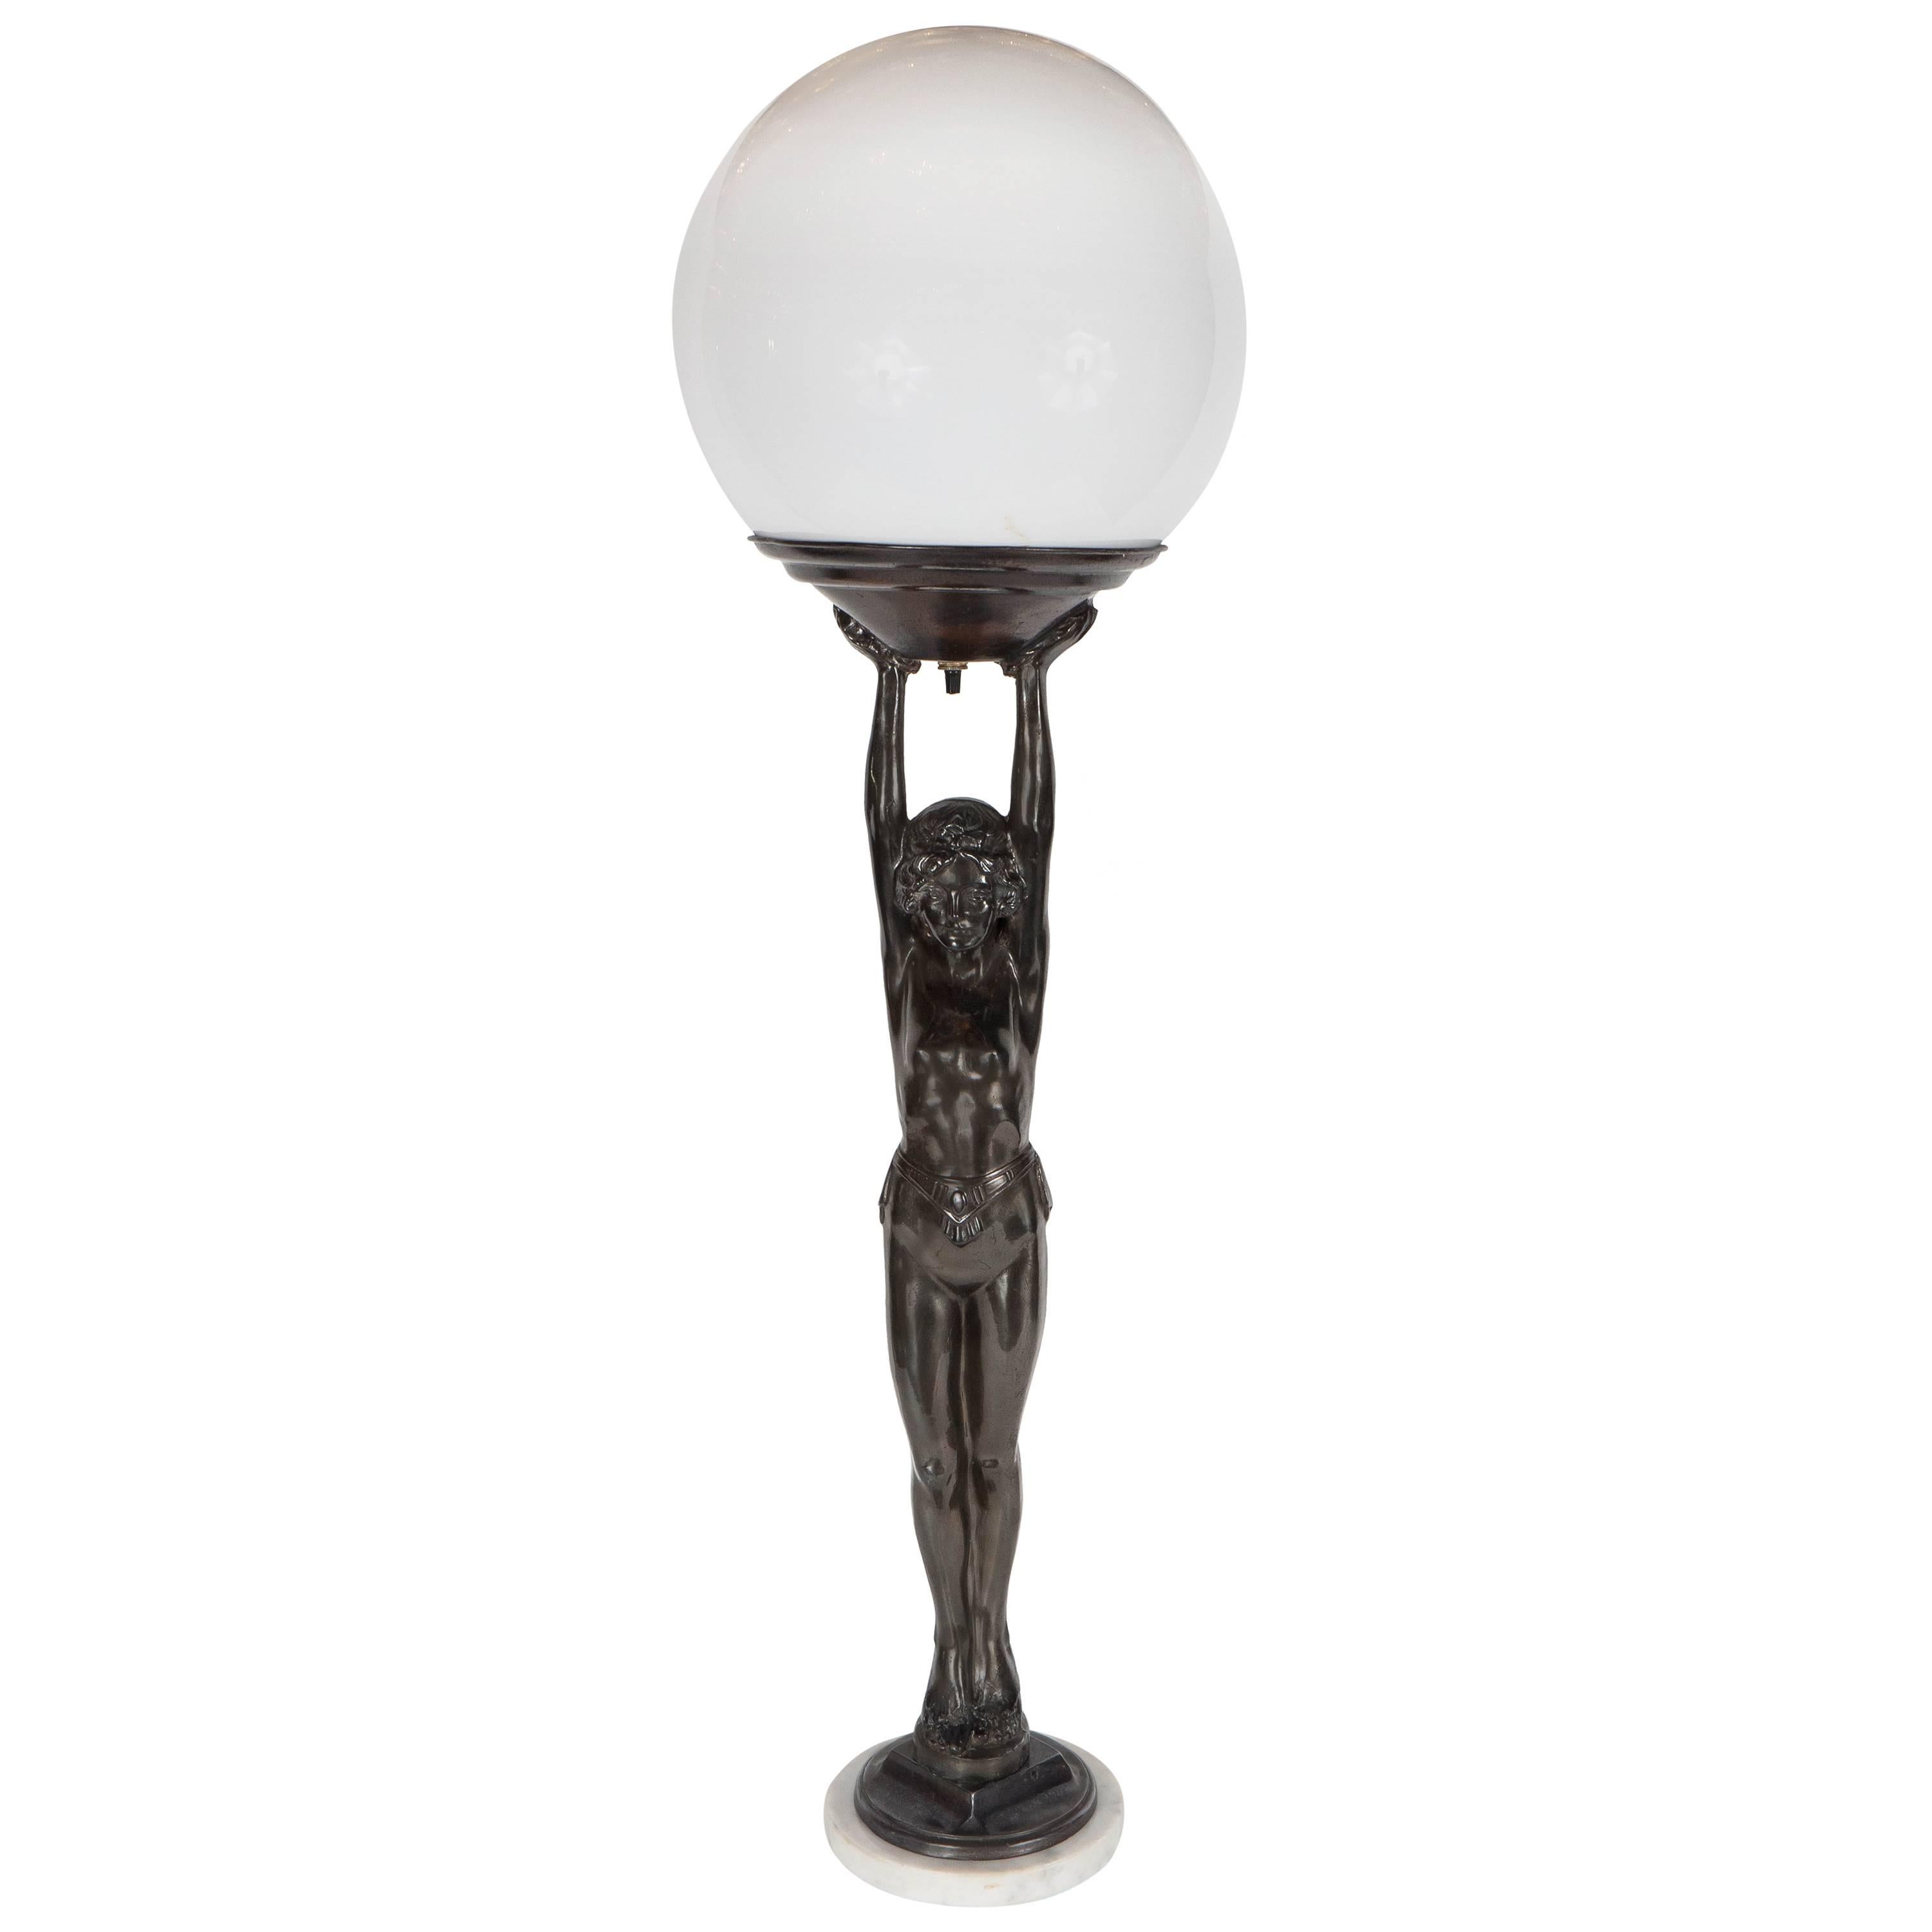 Art Deco Flapper Lady Uplight by Everlite in  Patinated Bronze With Marble Base